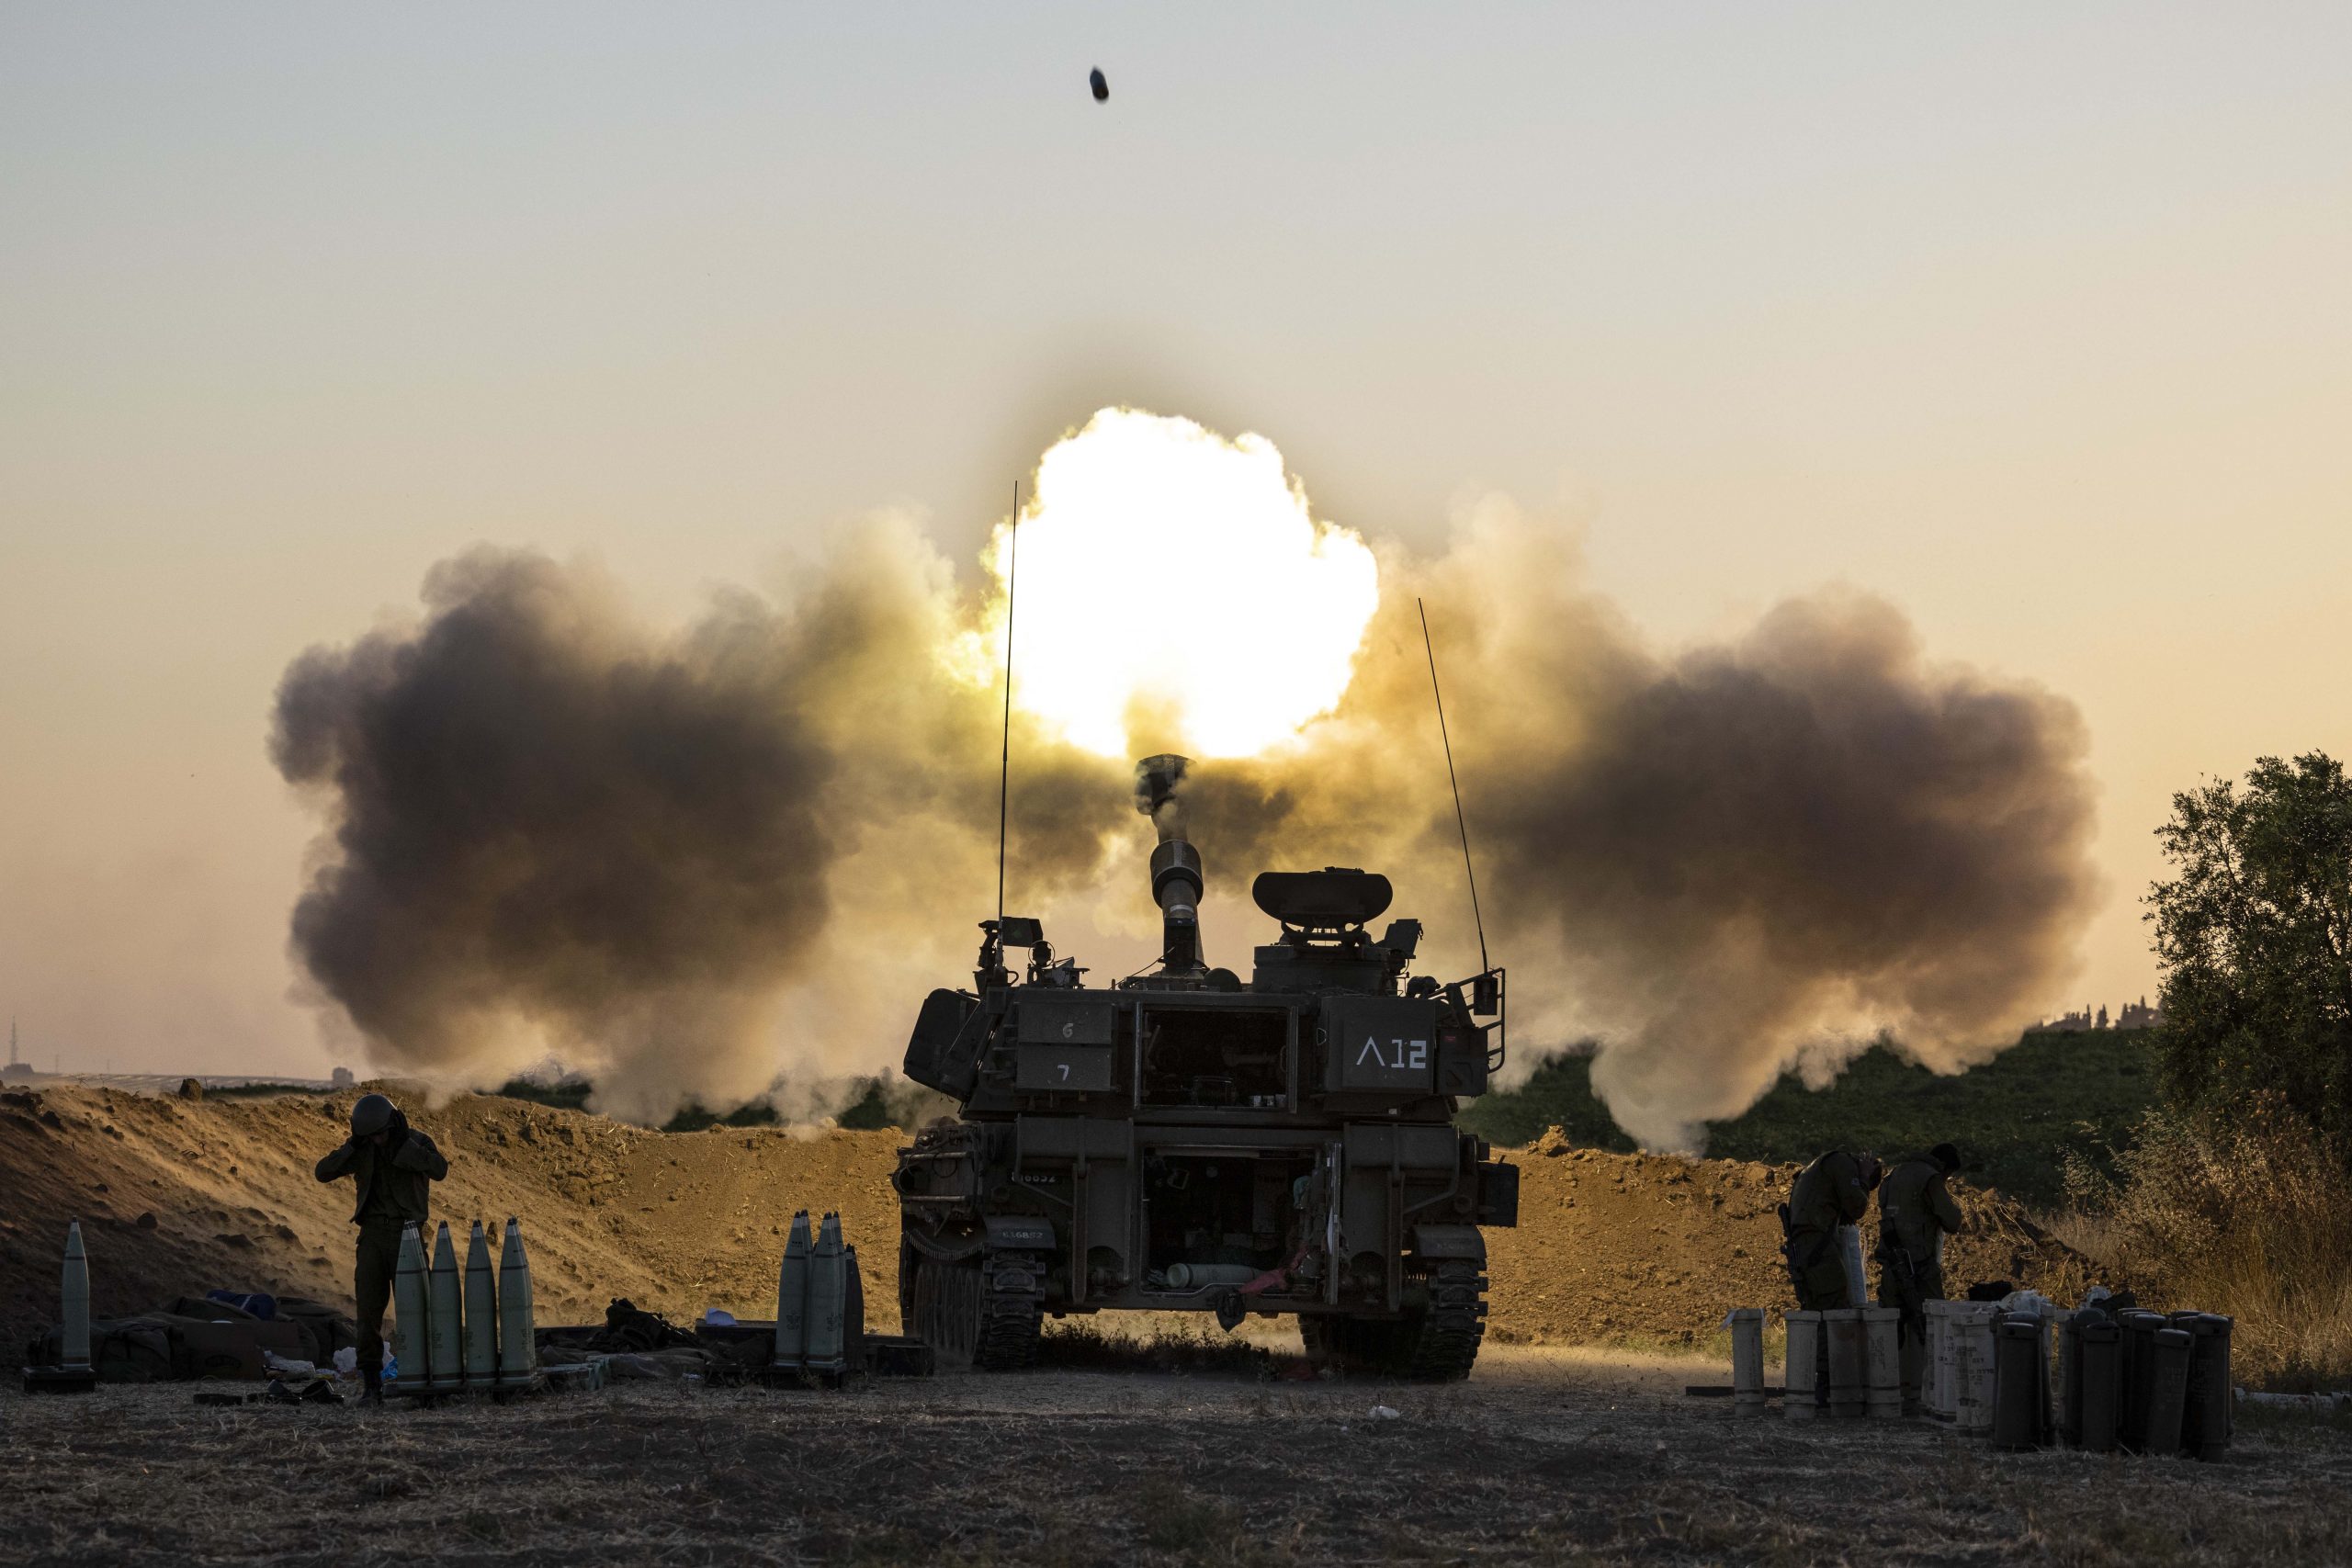 Ceasefire in Israel-Gaza conflict: What’s next?